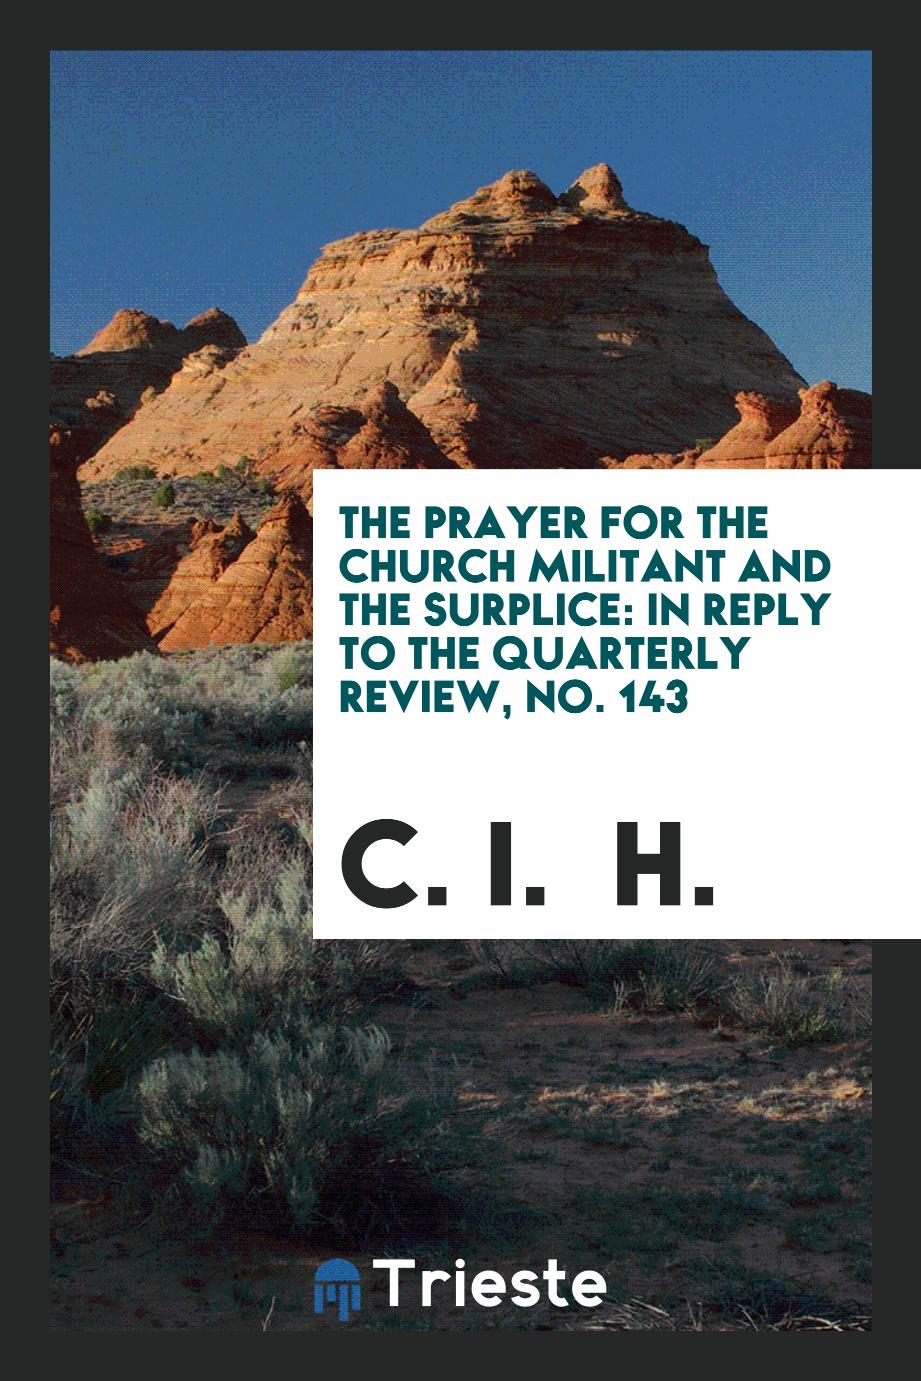 The prayer for the Church militant and the Surplice: in reply to the Quarterly review, No. 143